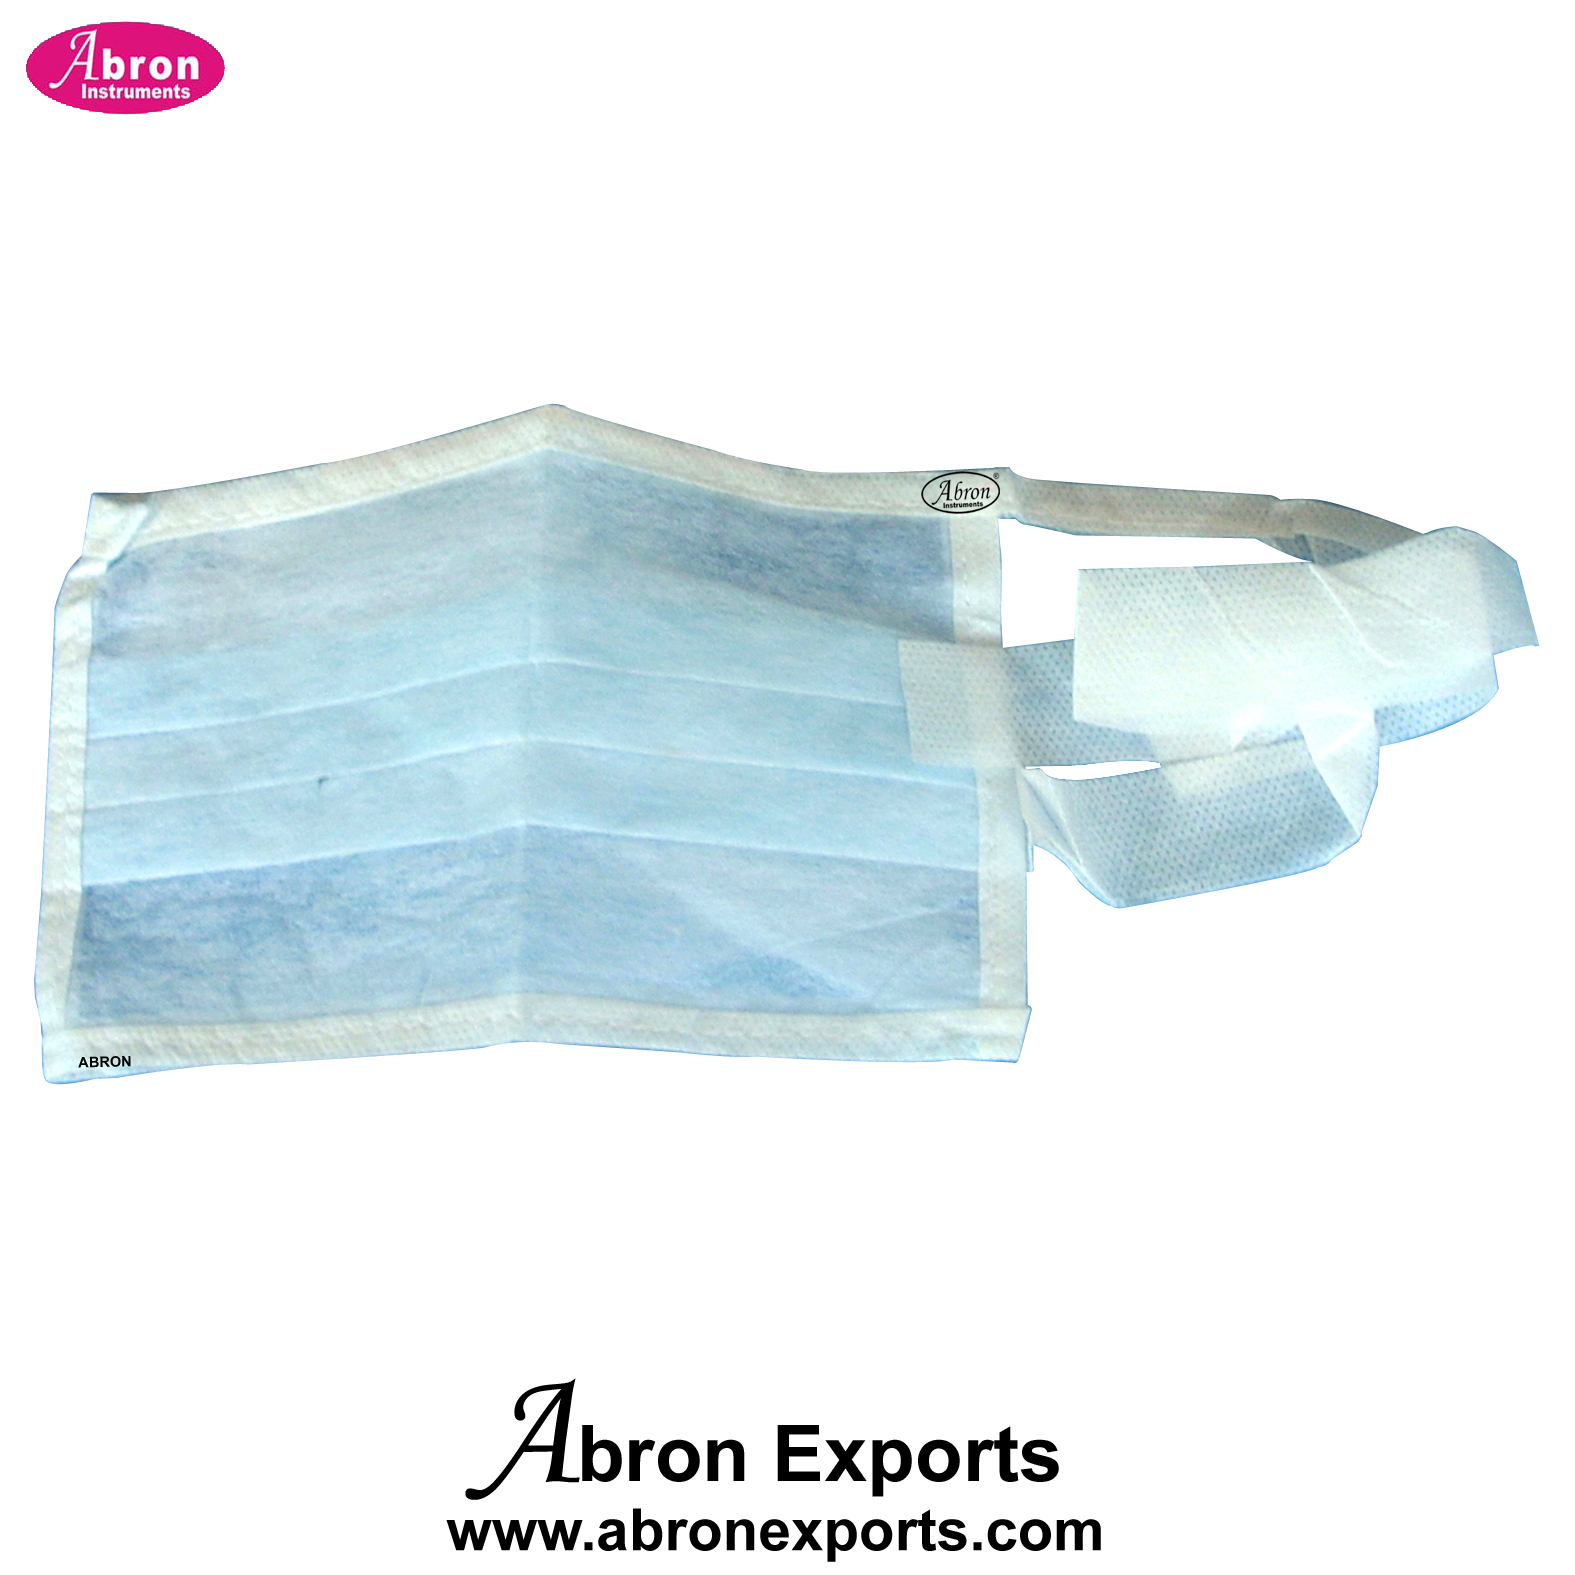 Face mask 3ply Disposable Surgical Mask clinic ot hospital examination pack of 100 AB-552FM3P